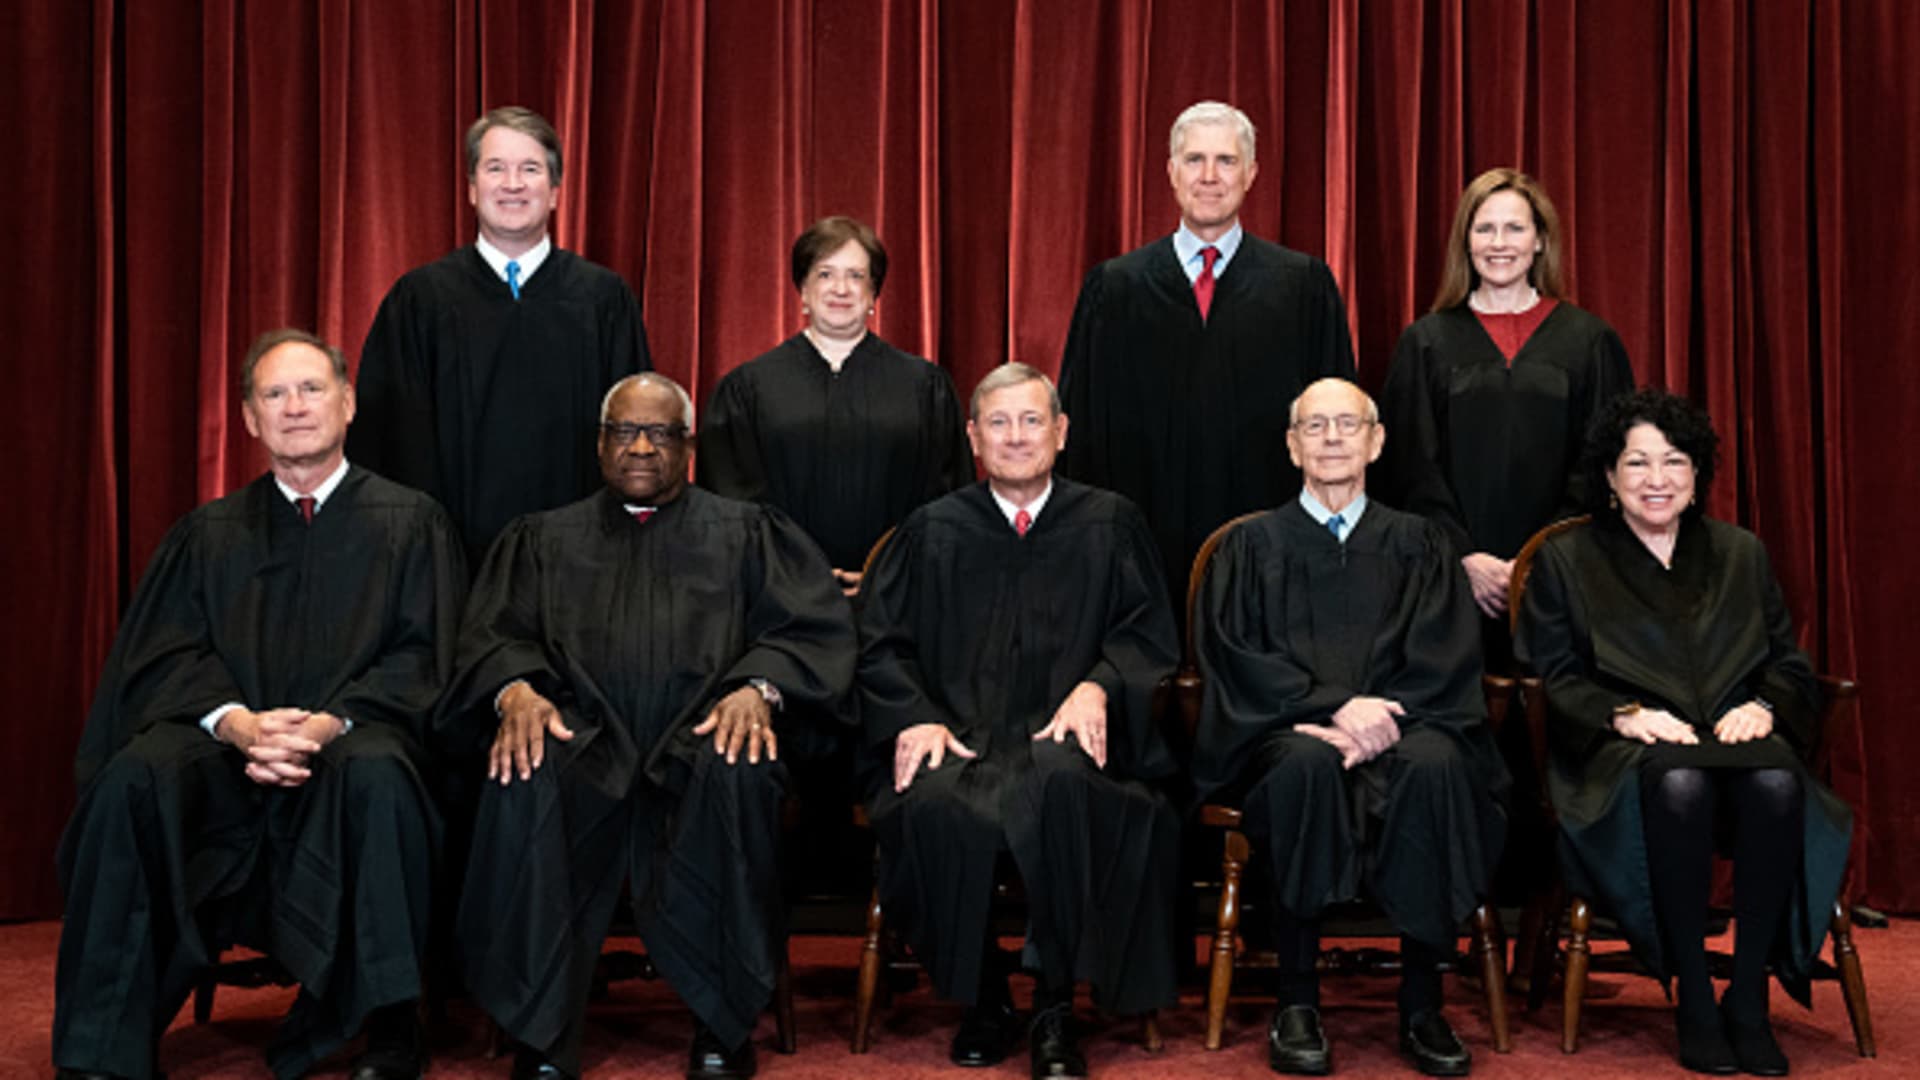 Members of the Supreme Court pose for a group photo at the Supreme Court in Washington, DC on April 23, 2021. Seated from left: Associate Justice Samuel Alito, Associate Justice Clarence Thomas, Chief Justice John Roberts, Associate Justice Stephen Breyer and Associate Justice Sonia Sotomayor, Standing from left: Associate Justice Brett Kavanaugh, Associate Justice Elena Kagan, Associate Justice Neil Gorsuch and Associate Justice Amy Coney Barrett.